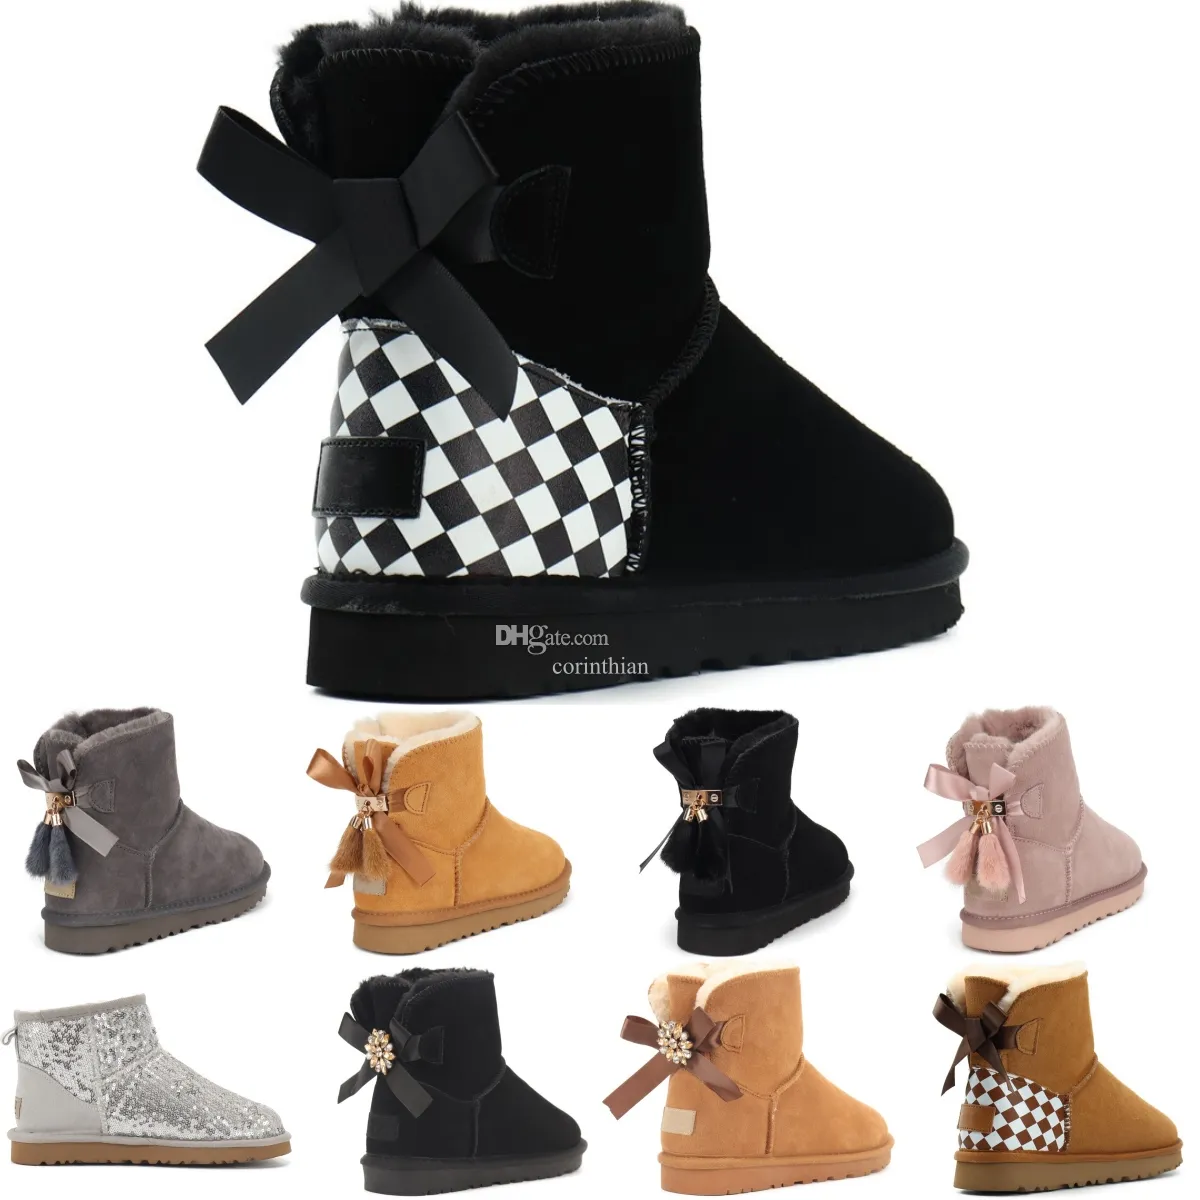 Mini Bow Australian Kids Boots Classic Girls Shoes Toddler Children Winter Snow Boot Wggs II Baby Kid Youth uggly Chestnut Black Furry Bailey Warm Gre 726o#